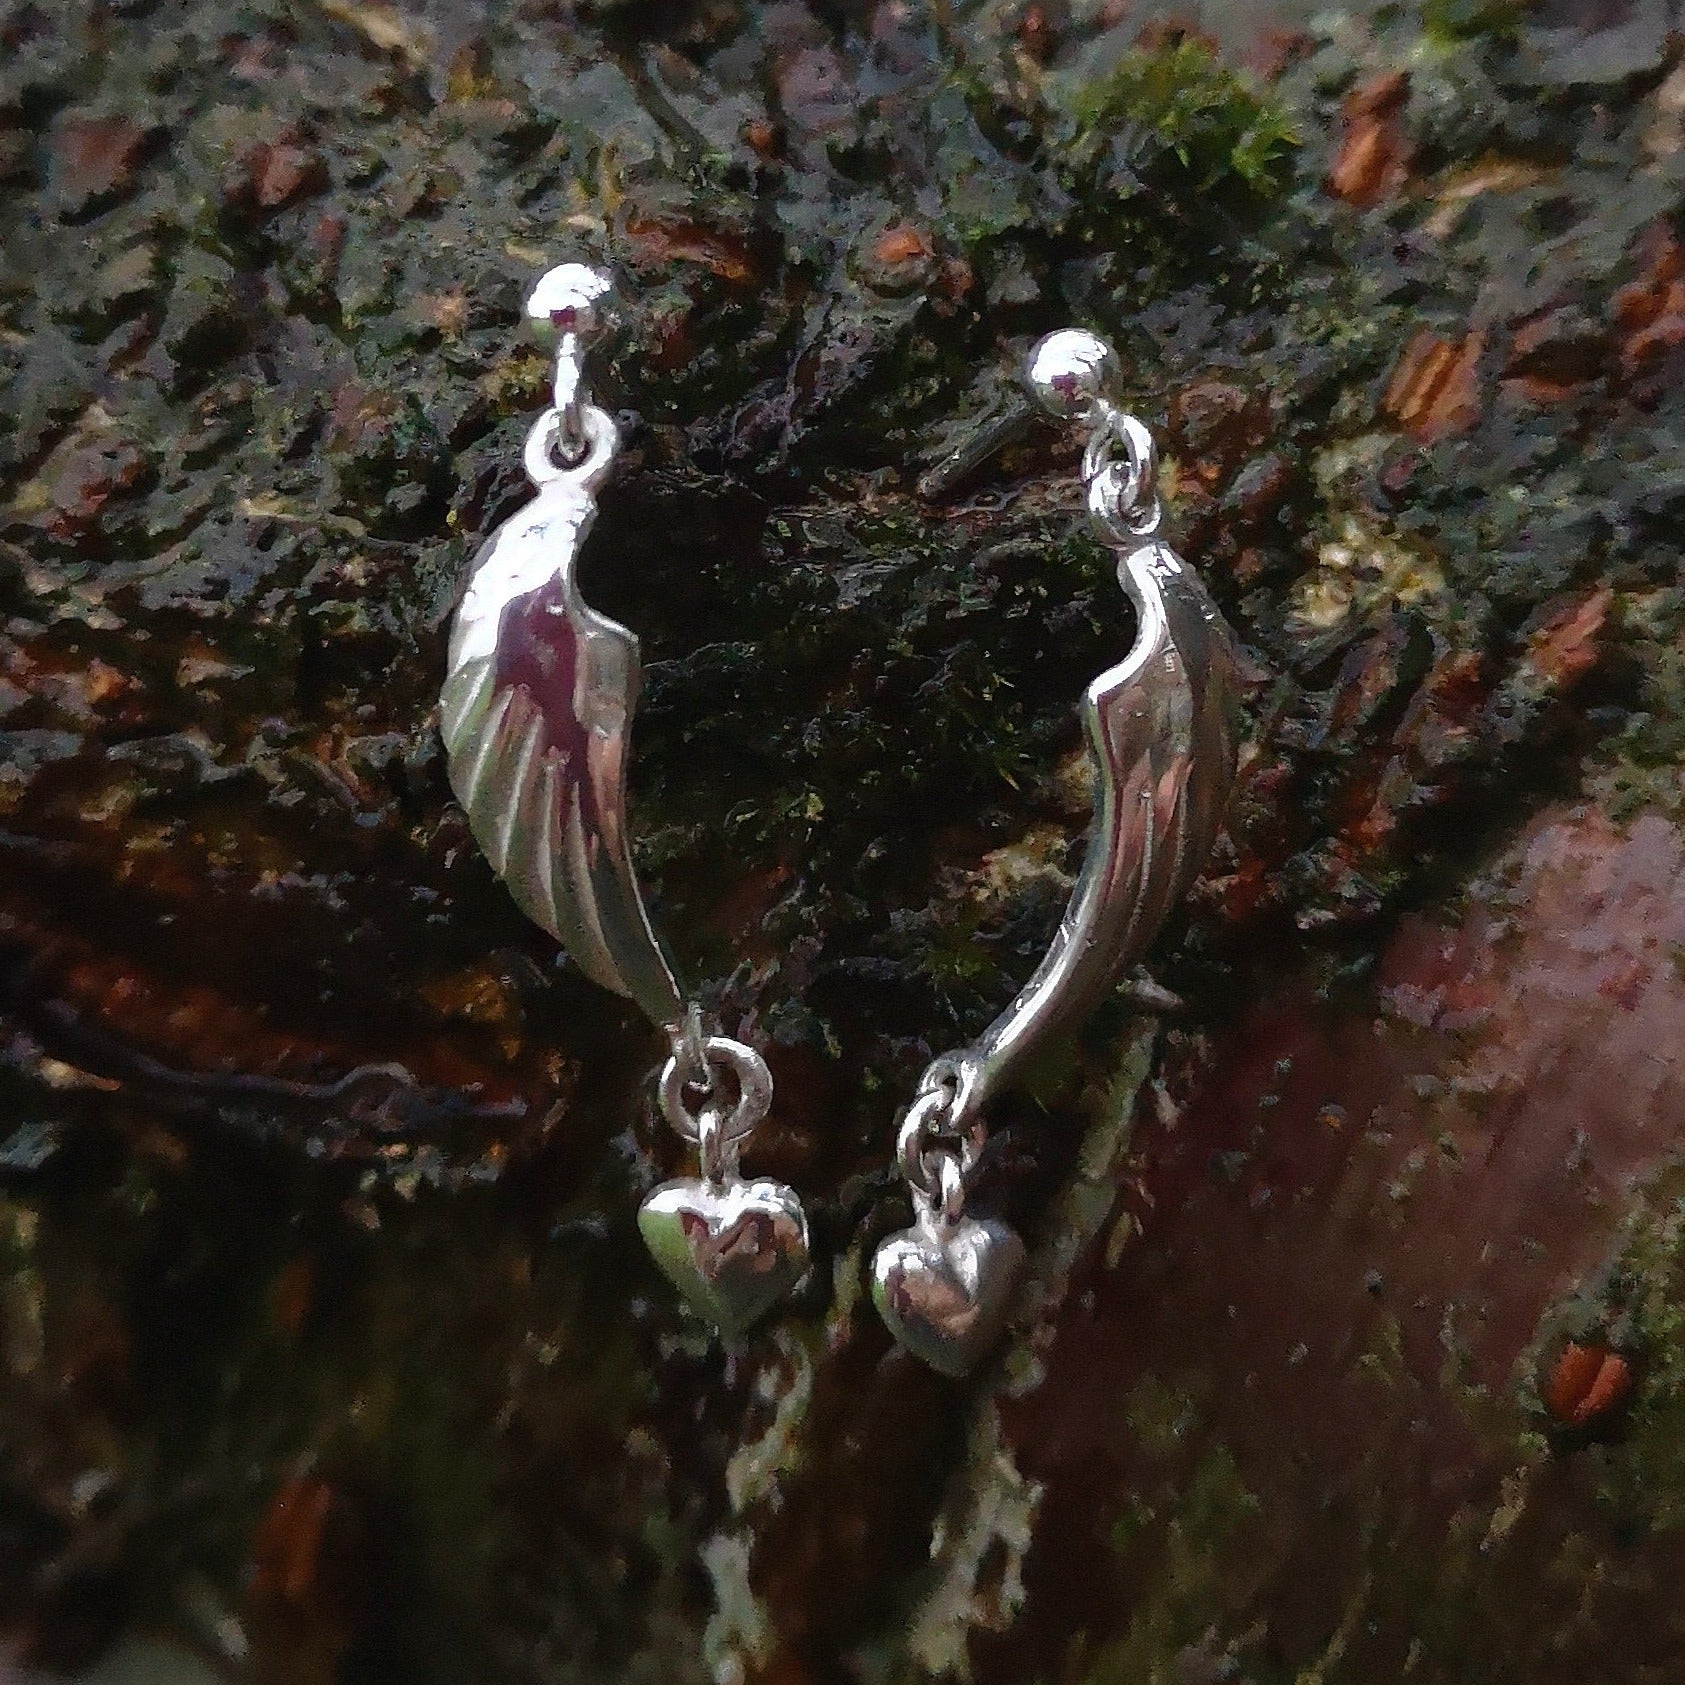 Angel Hug Earrings handmade from Sterling Silver by Irish Jewellery Designer Elena Brennan. These angel wing earrings are displayed against tree bark and are part of the My Angel jewellery collection.